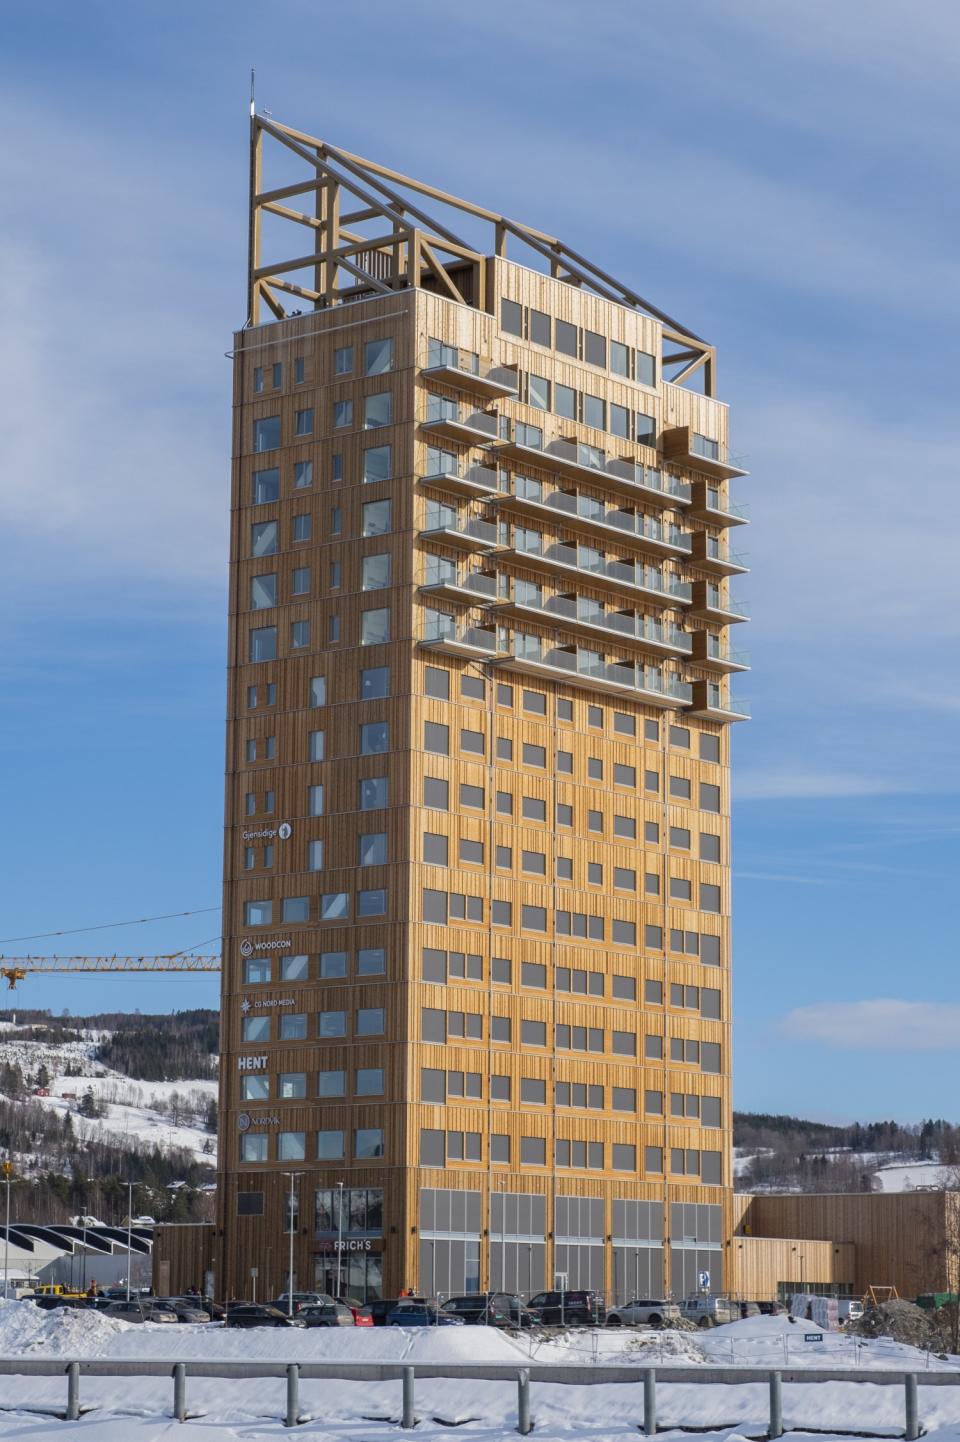 A look at the exterior of Mjøstårnet, the world's tallest timber structure.